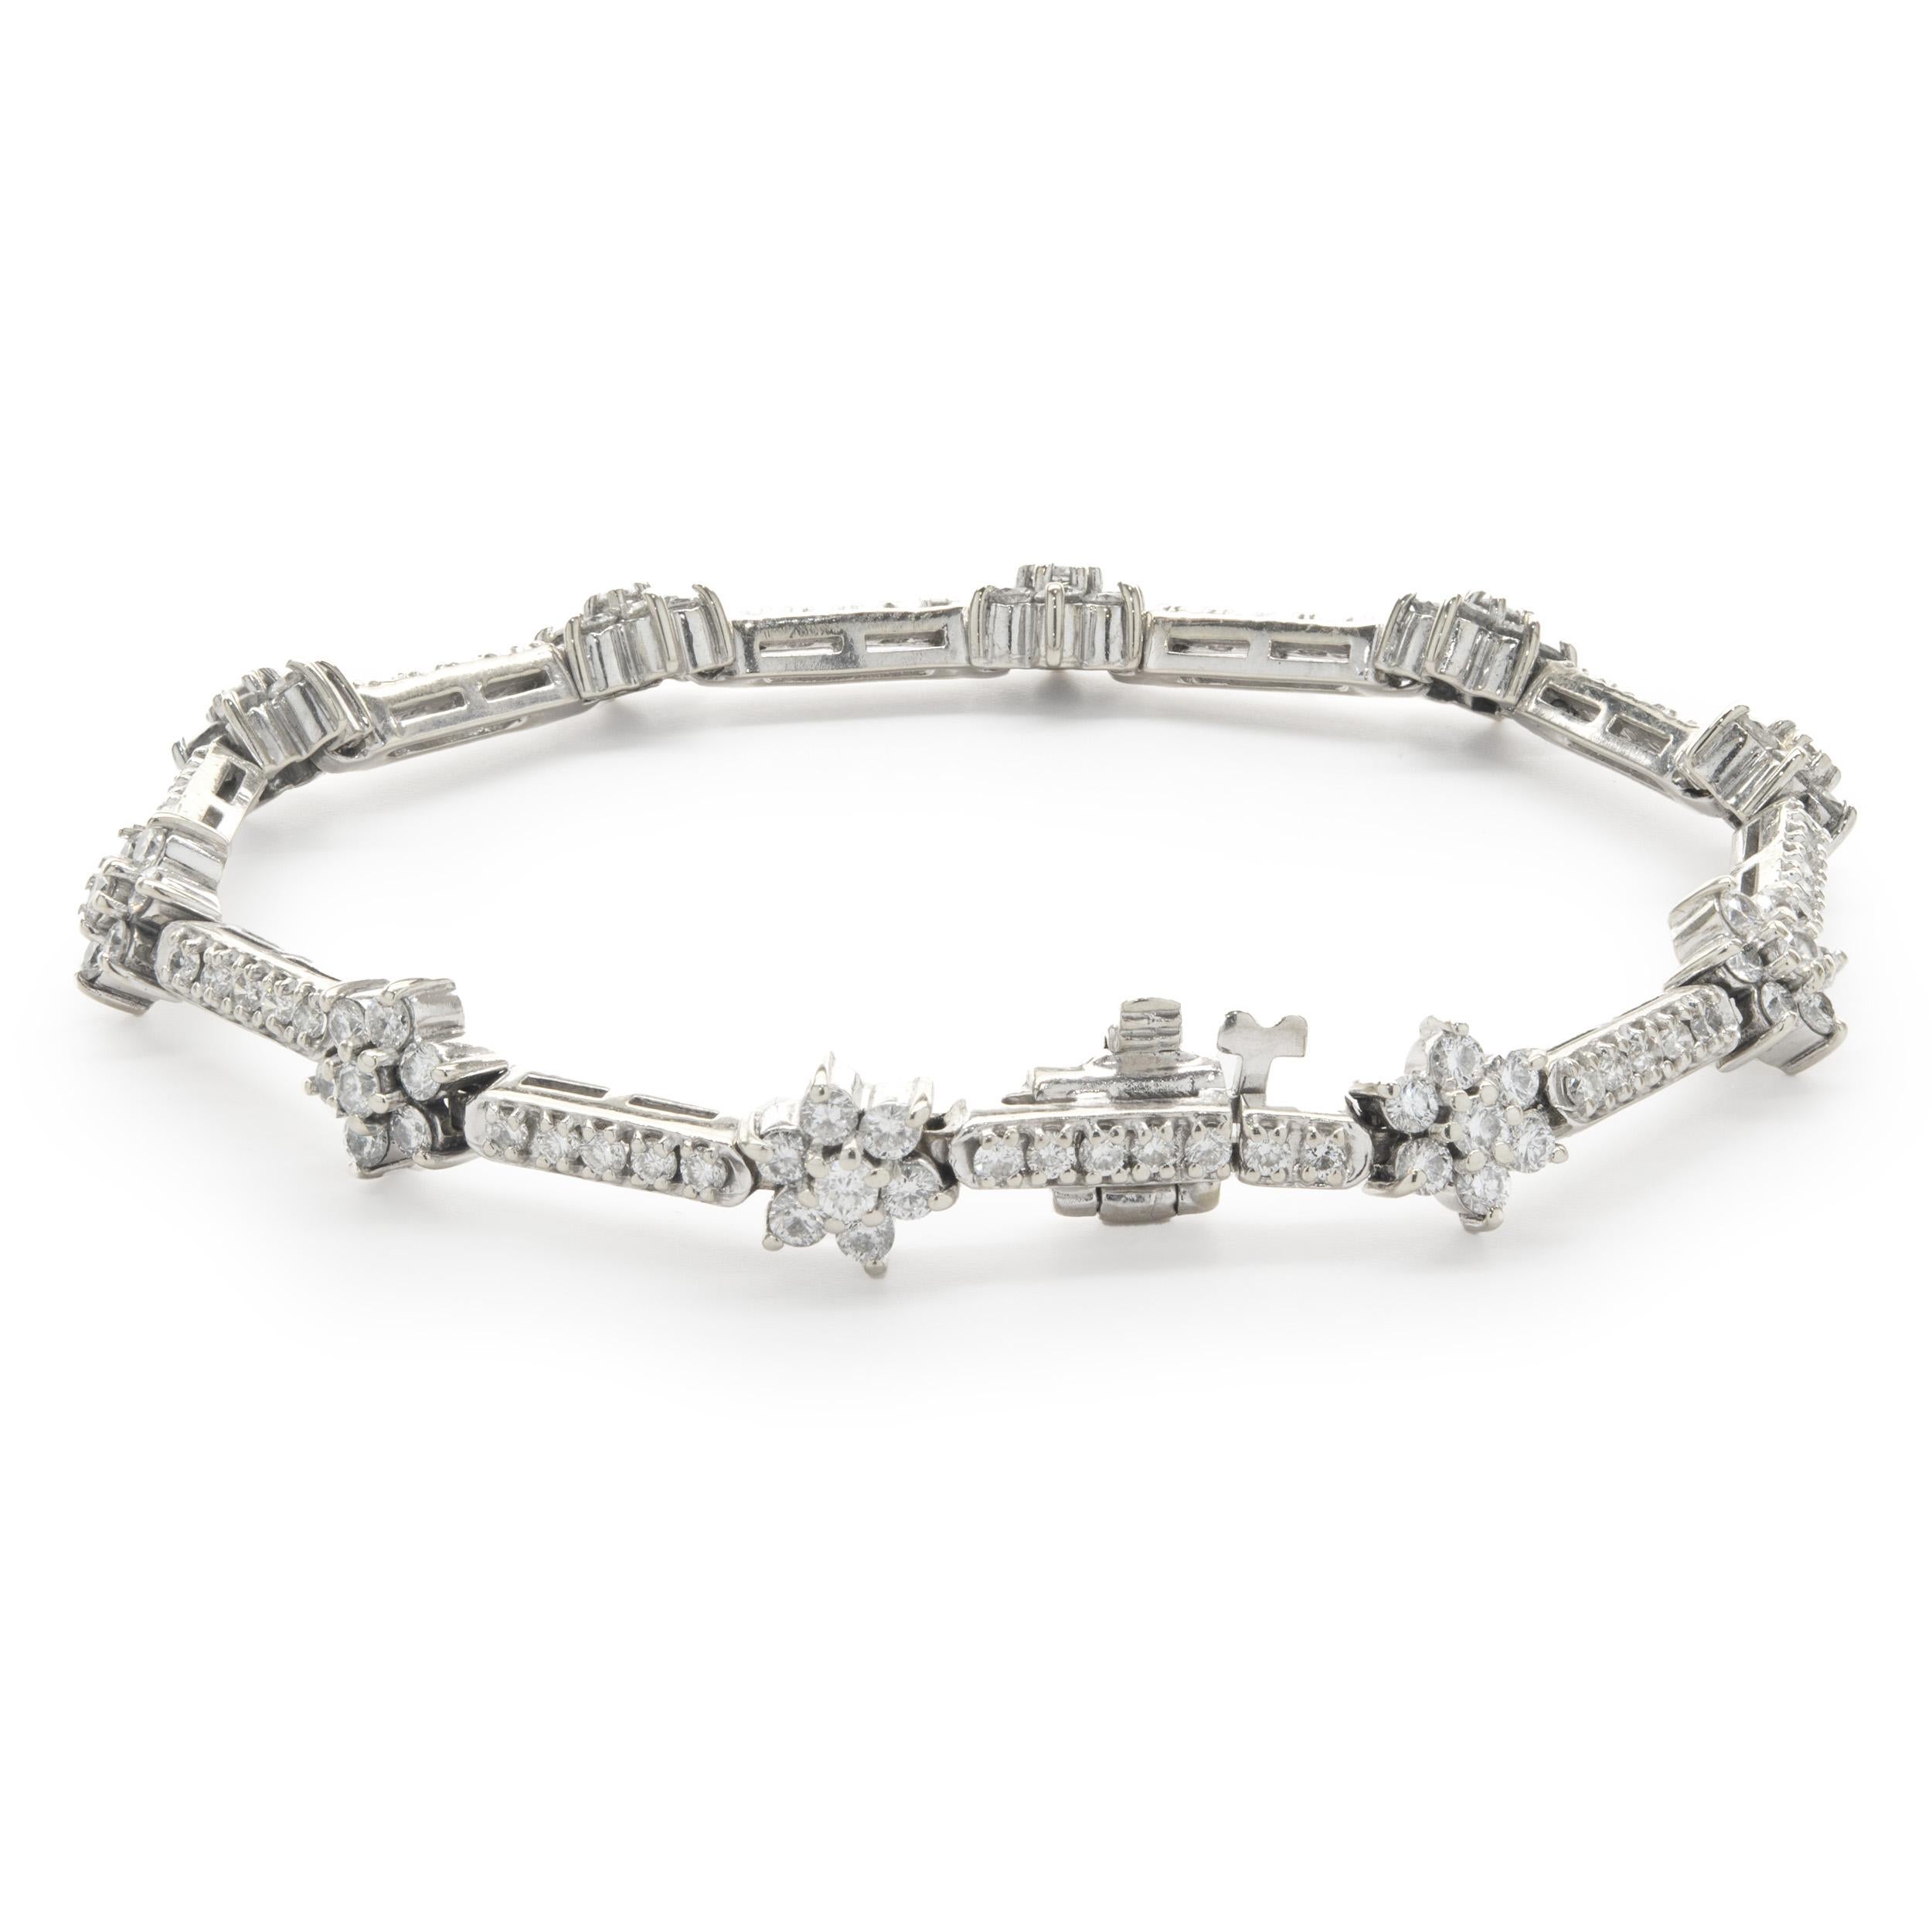 Designer: custom
Material: 14K white gold
Diamonds: 122 round brilliant cut = 2.30cttw
Color: H
Clarity: SI1
Dimensions: bracelet will fit up to a 6.25-inch wrist
Weight: 10.72 grams